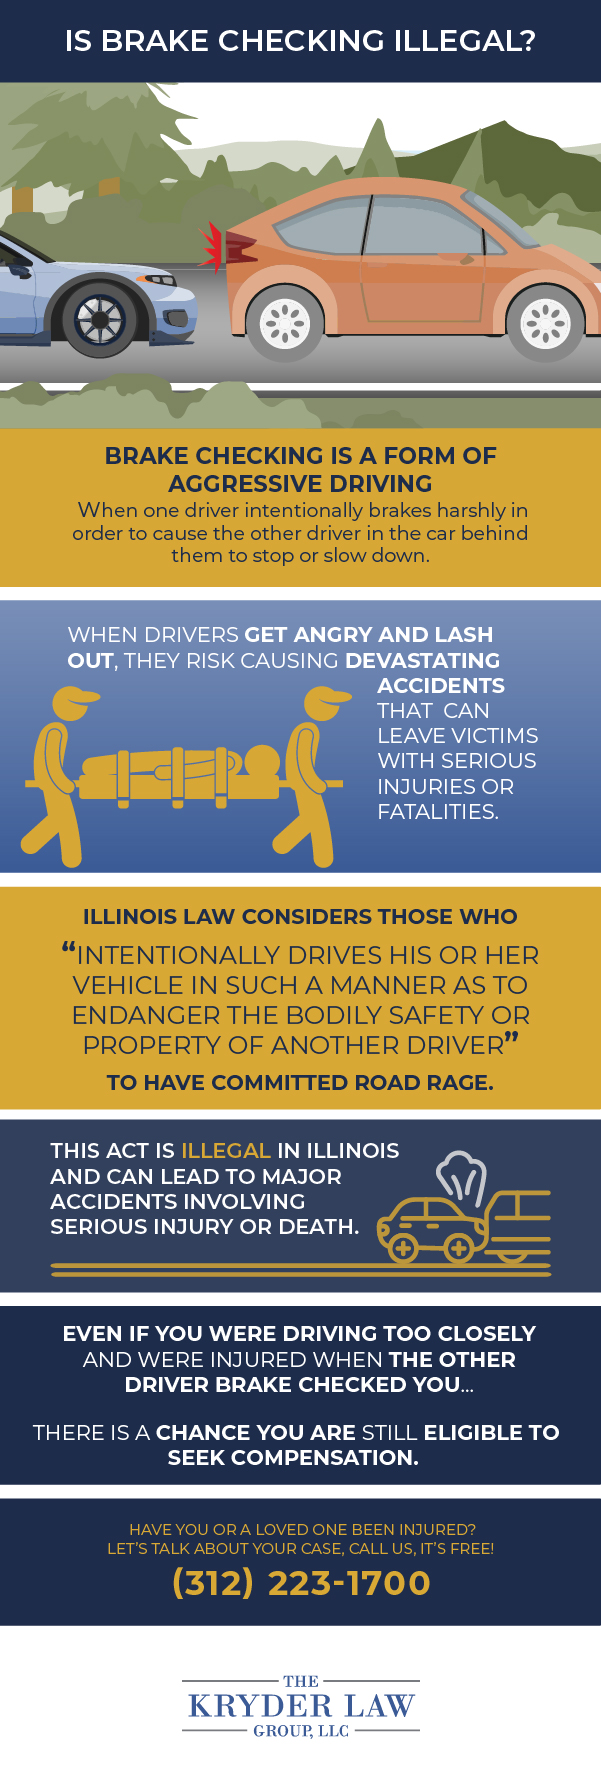 Is Brake Checking Legal in Illinois?